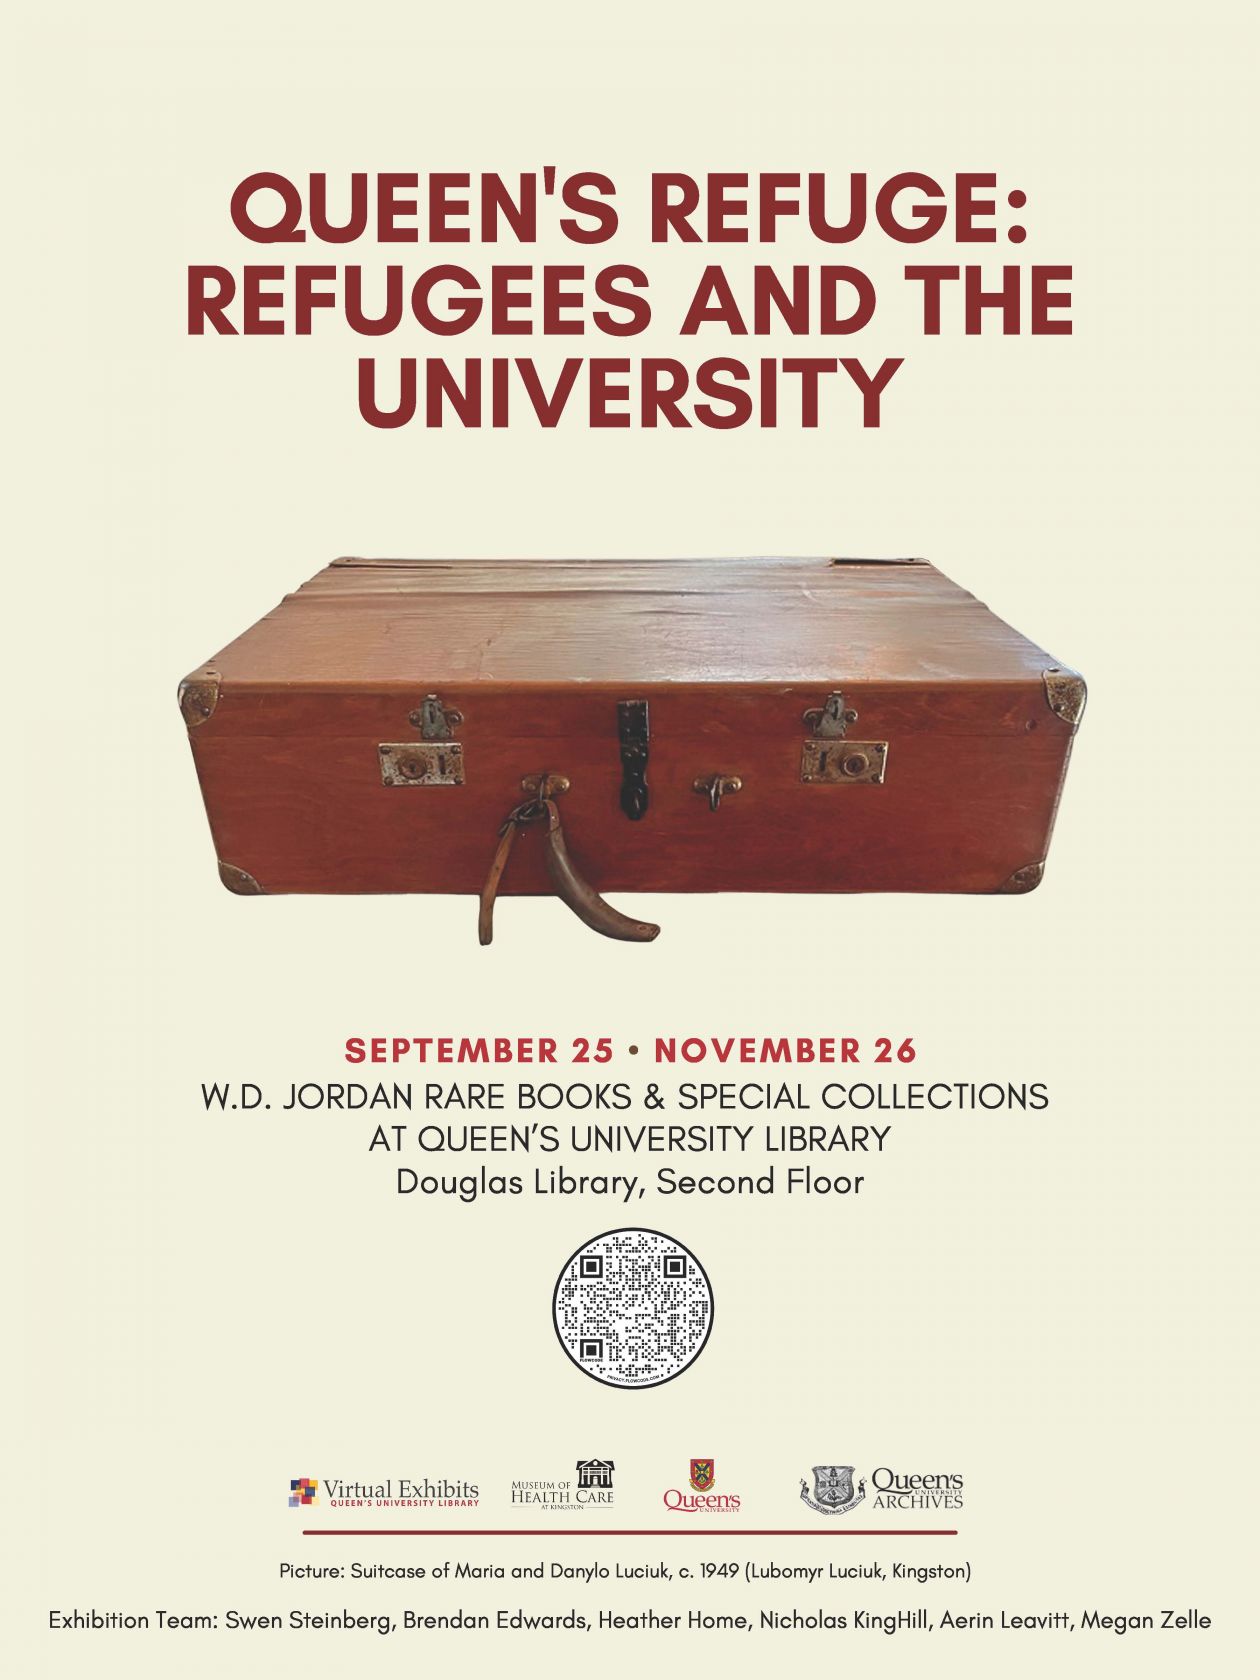 Image of an old suitcase with the exhibition title